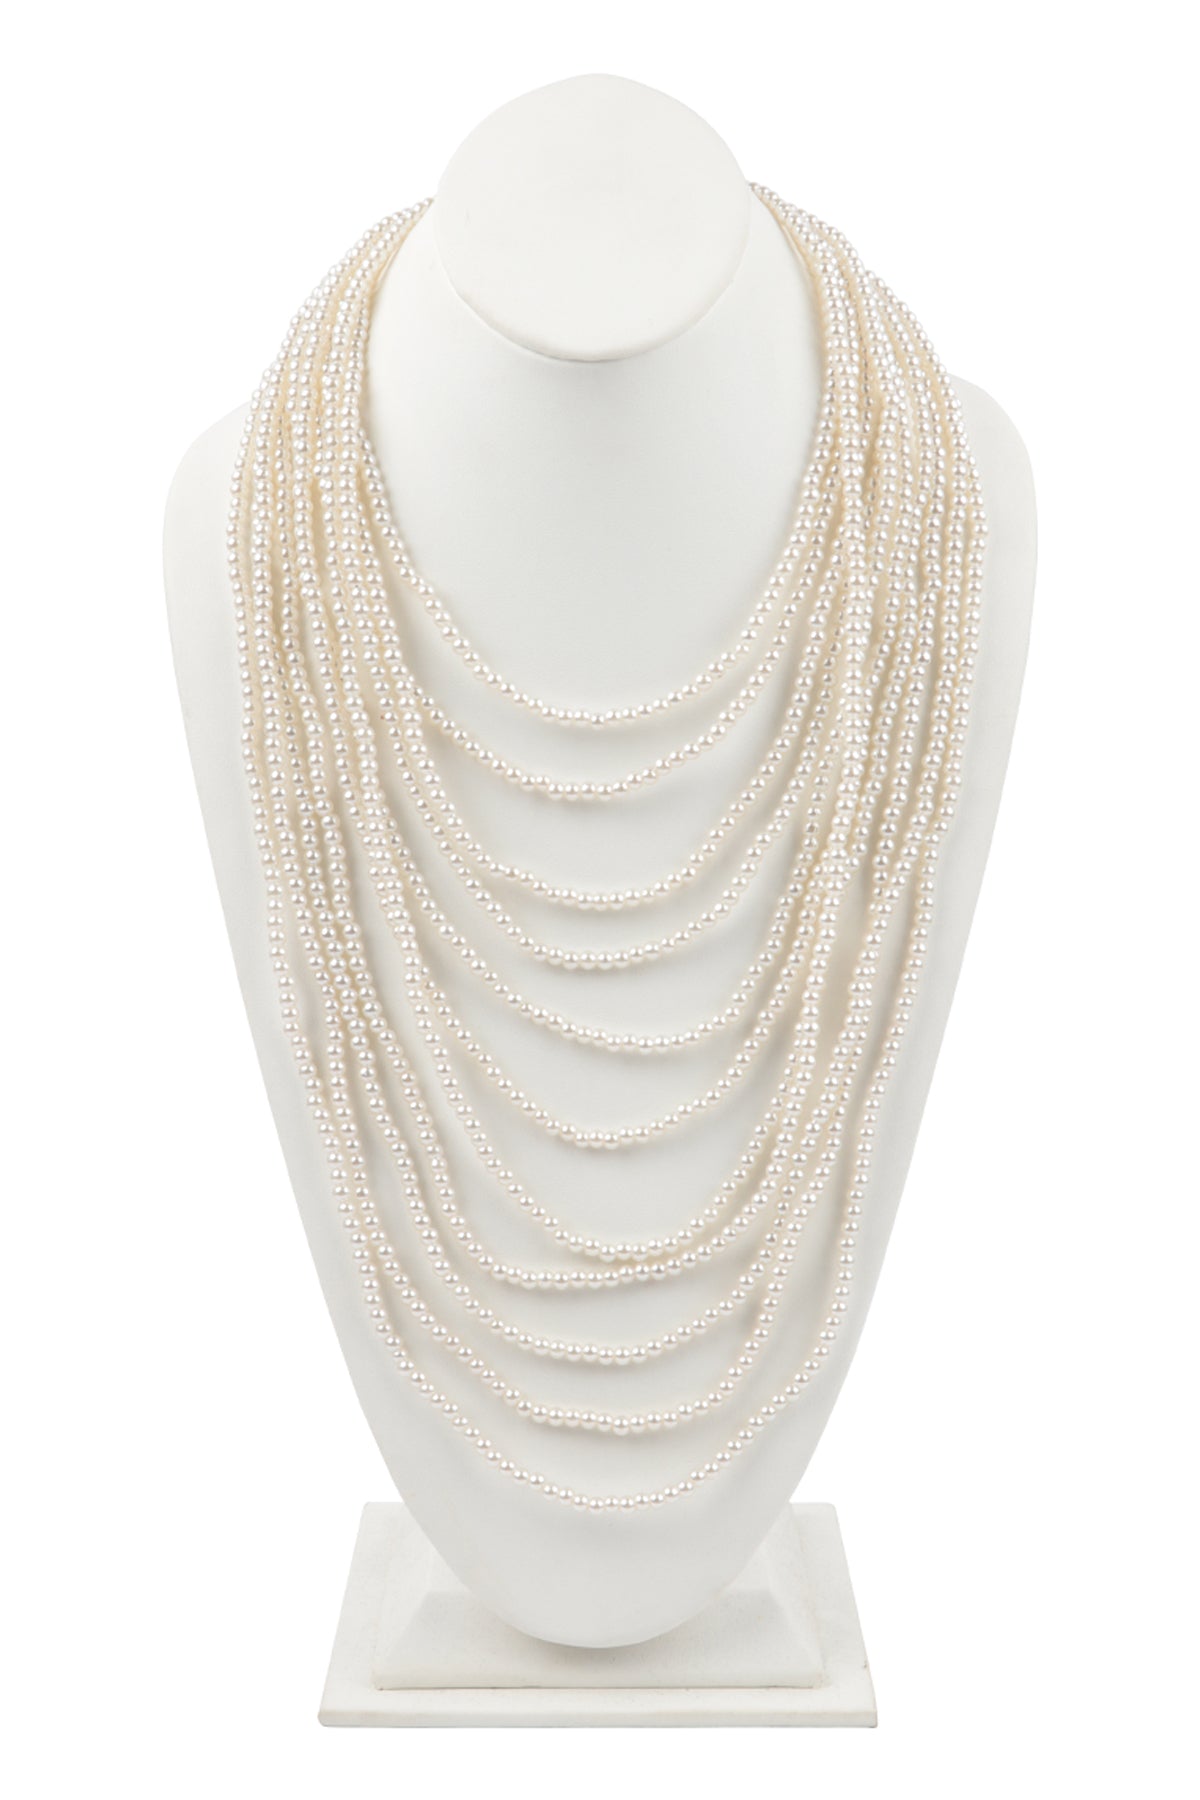 MULTI LAYER PEARL BEADS STATEMENT NECKLACE-CREAM